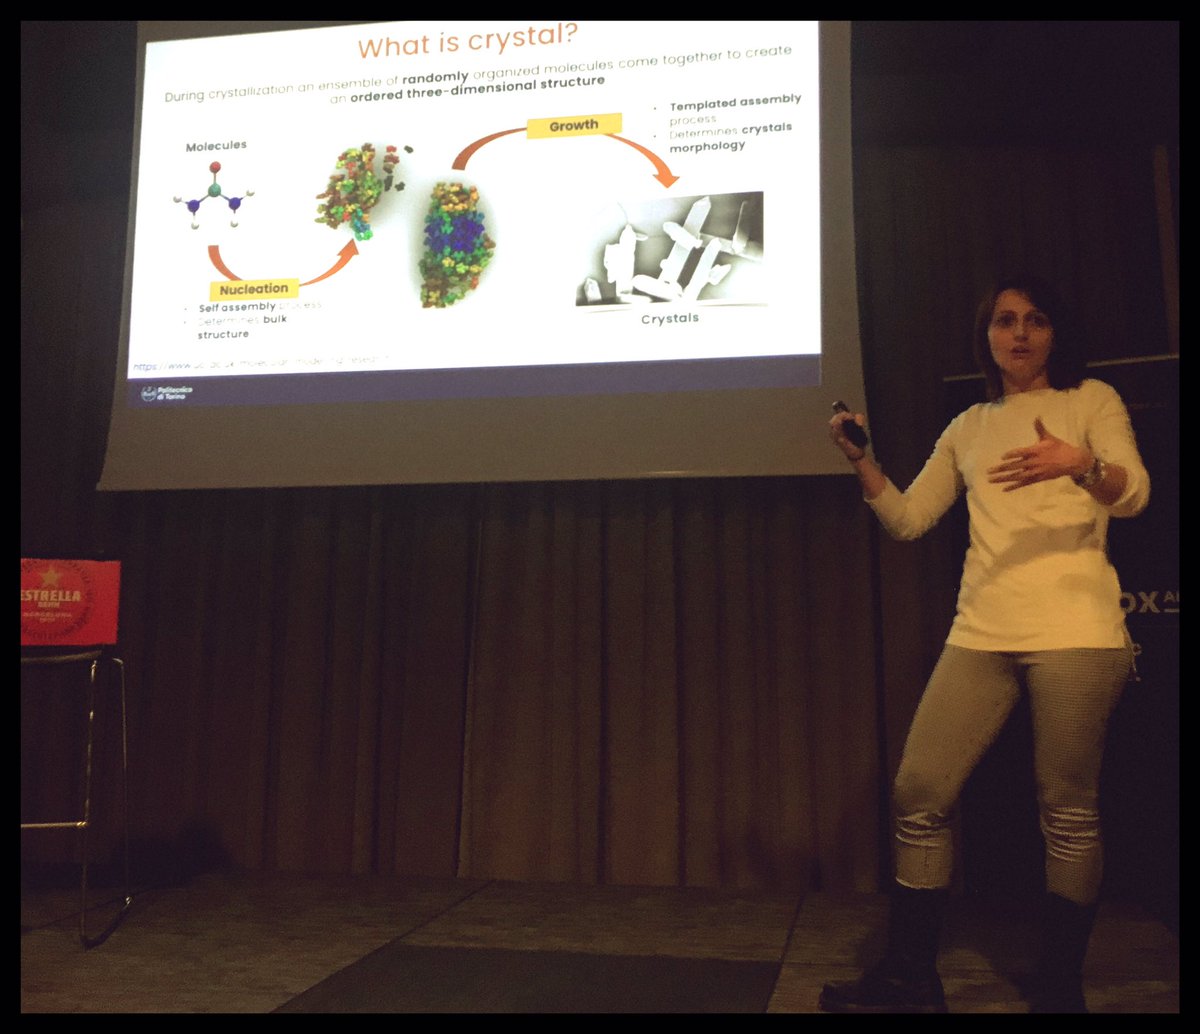 “Chocolate, candies and ice cream: messy datasets for sweet and ordered materials” by @elena_simone_ @PoliTOnews @databeerstorino @ClearboxAI @PythonTorino - Do Androids Dream of Big Data under the Tree? #crystalengineering #synchrotron #opendata #python